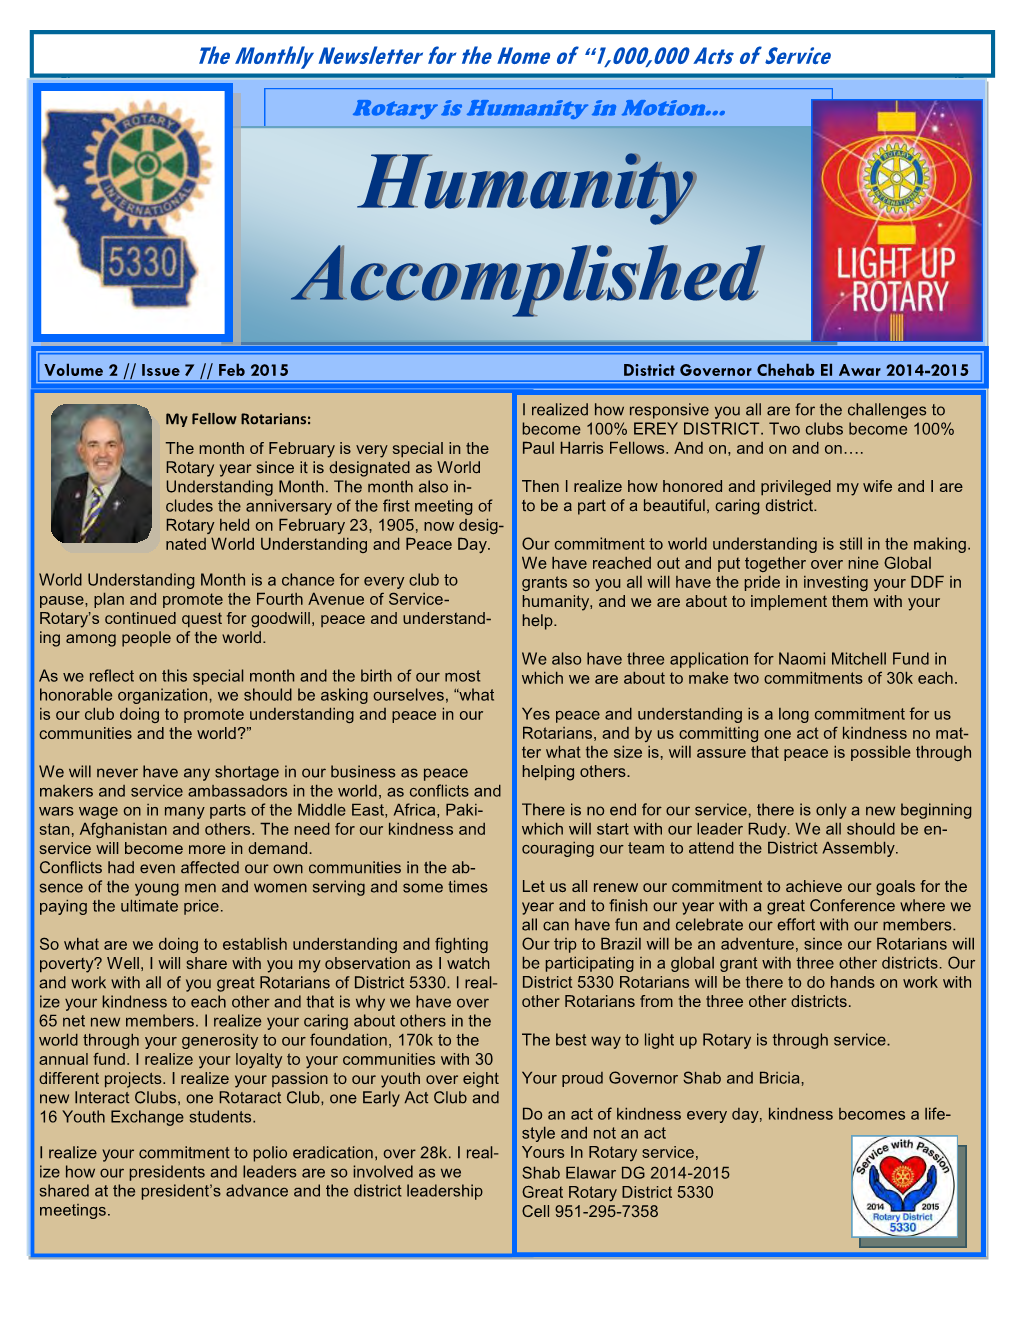 Humanity Accomplished the Monthly Newsletter for District 5330 Volume 2, Issue 7, Feb 2015 Rotary Is Humanity in Motion